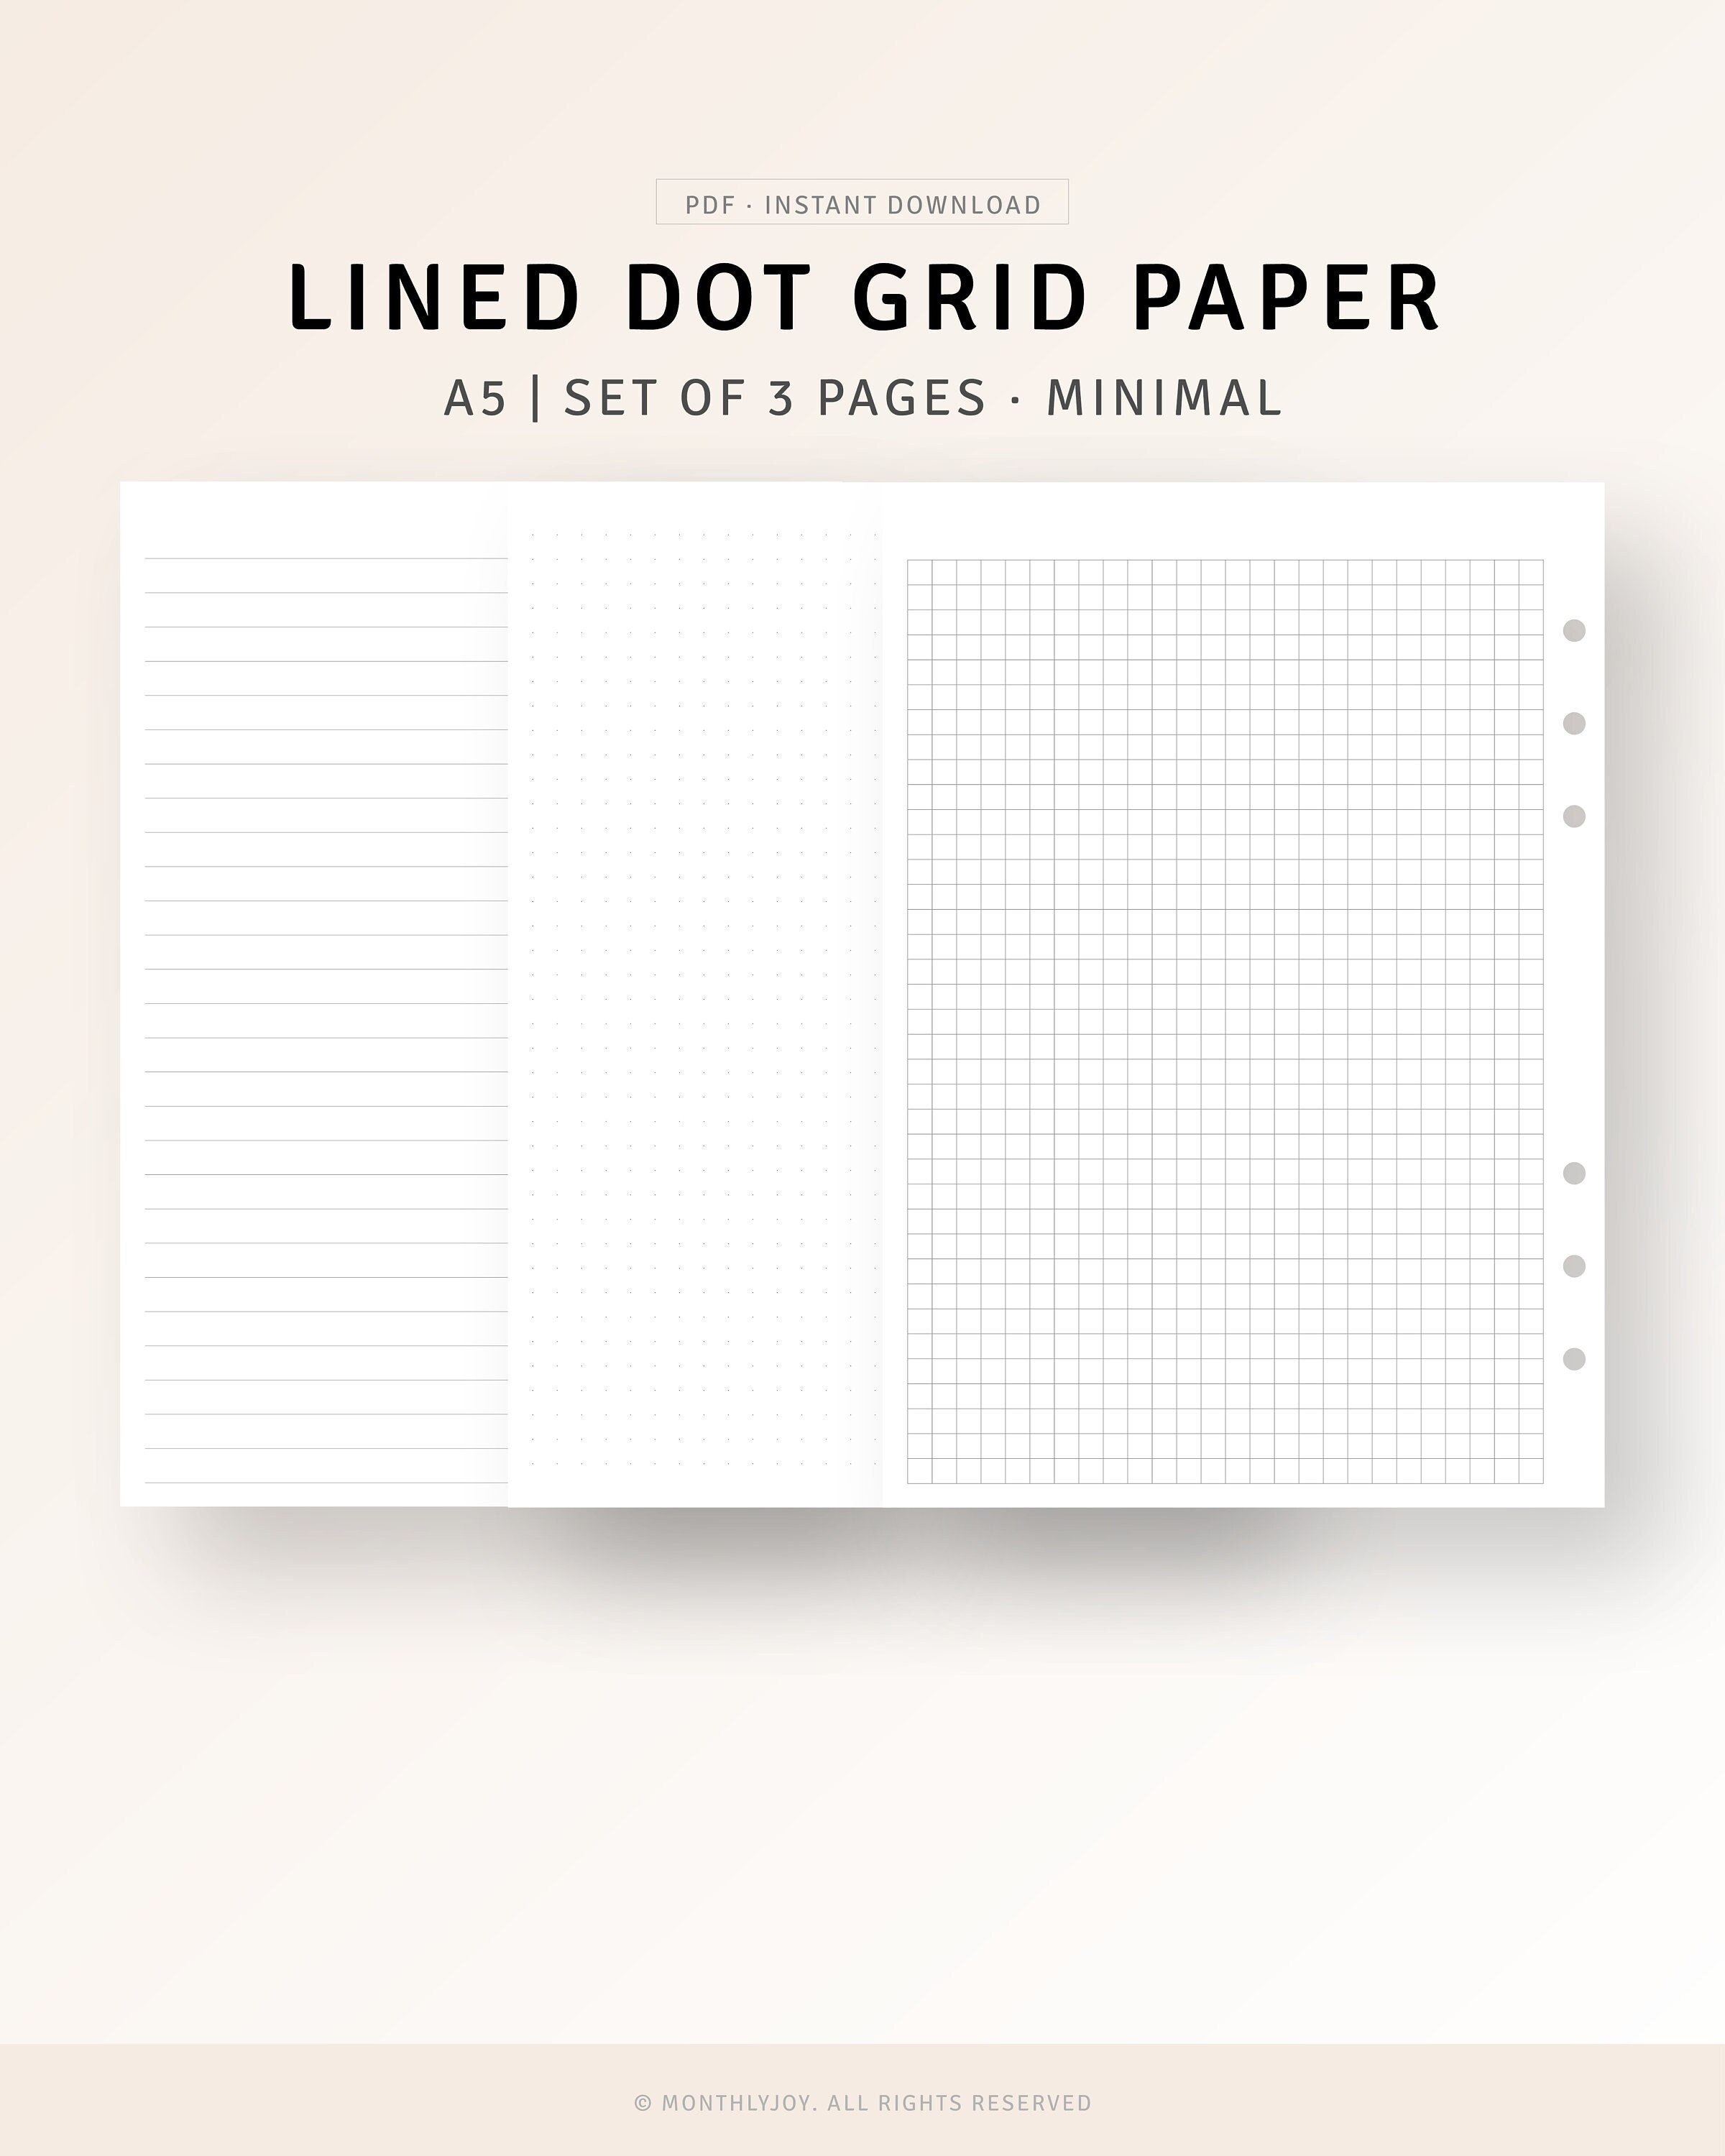 BULLET JOURNAL Dot Grid Paper, Dot Grid Paper Numbered Pages Printable,  Calligraphy Dot Grid Paper, 5mm Square Dot Grid, A4 A5 Letter PDF 